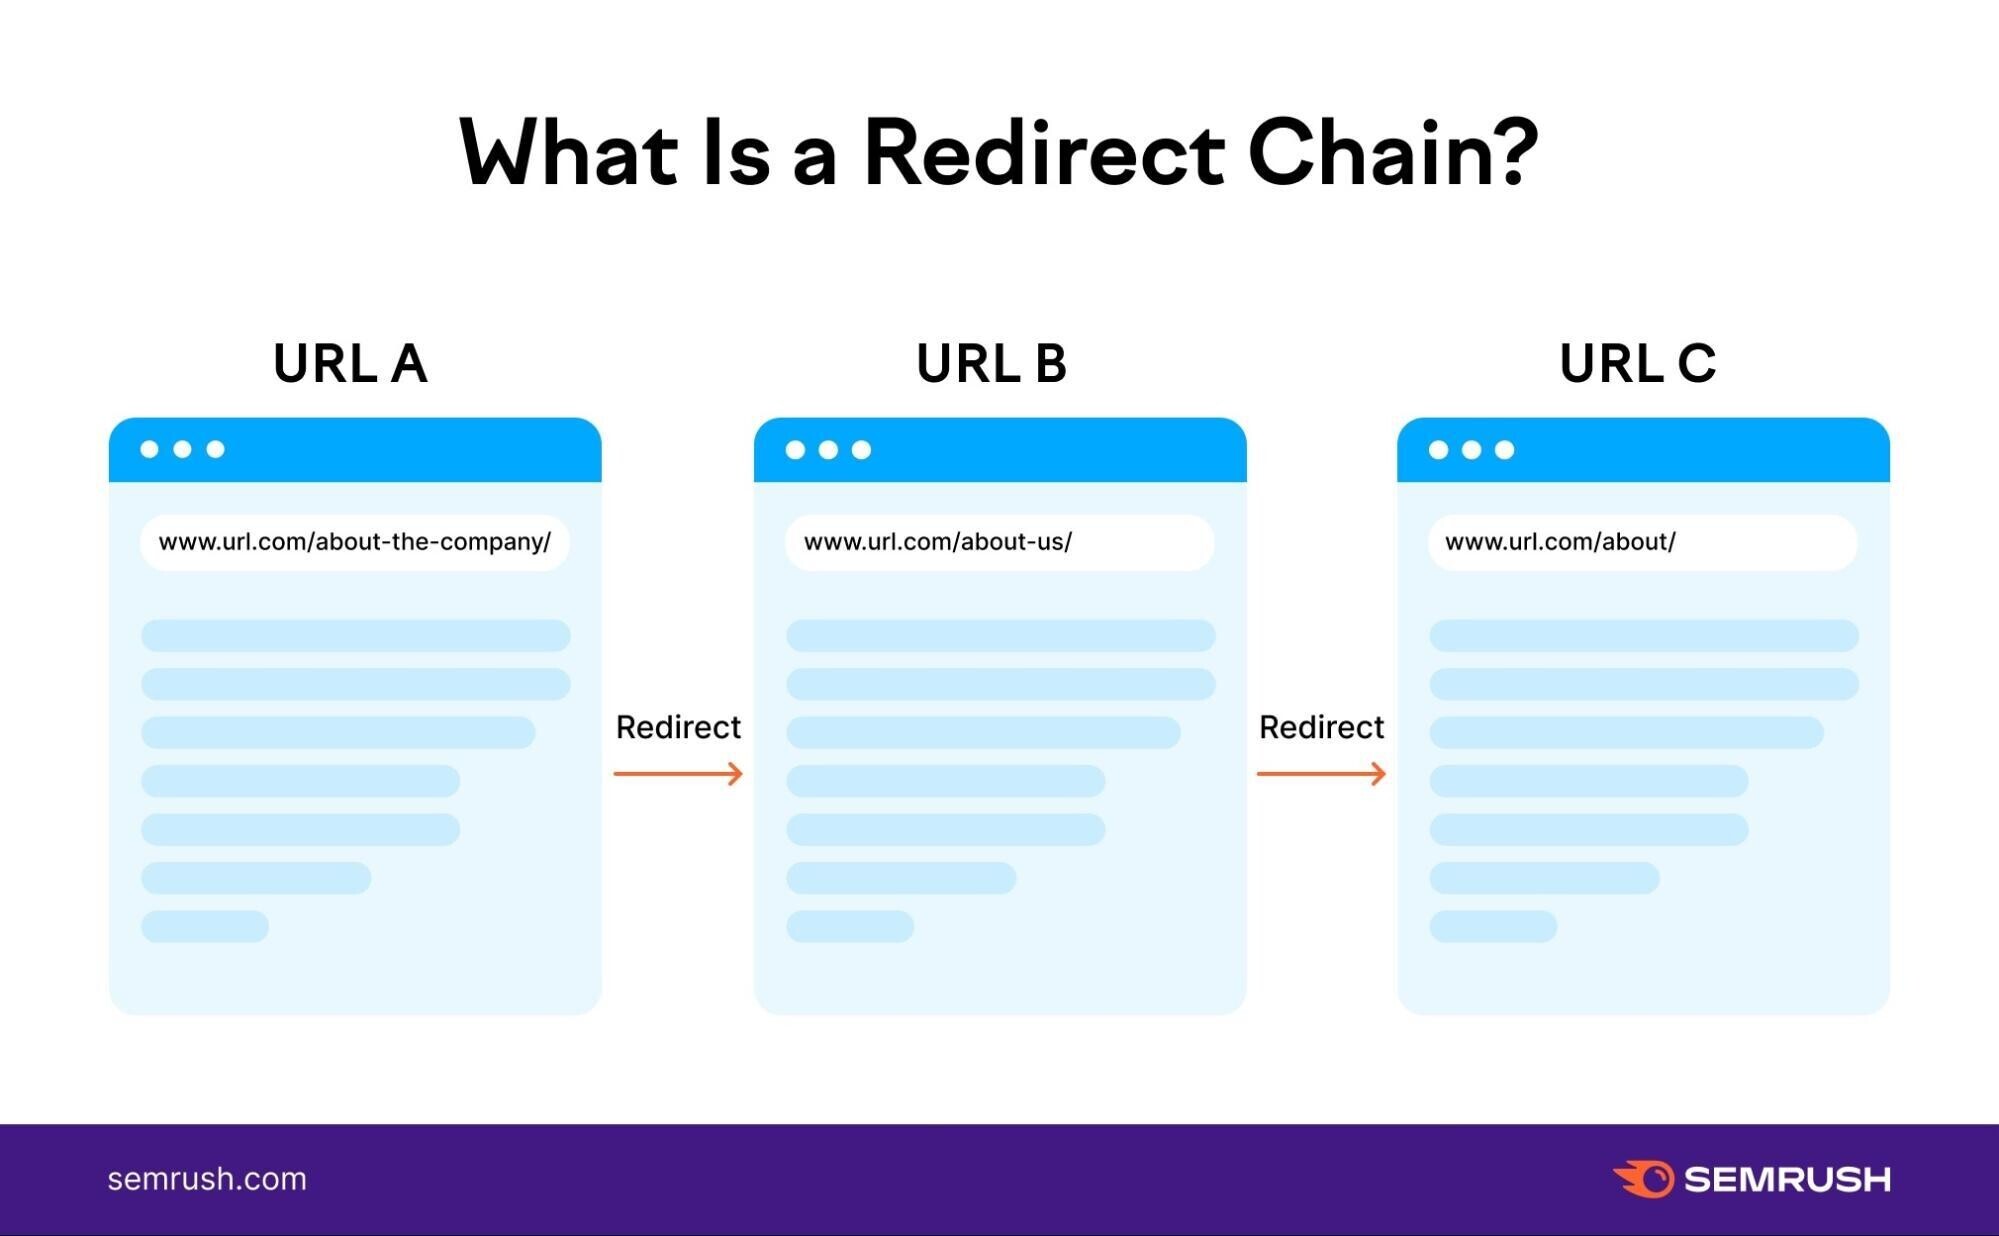 and image showing "What is a redirect chain?"